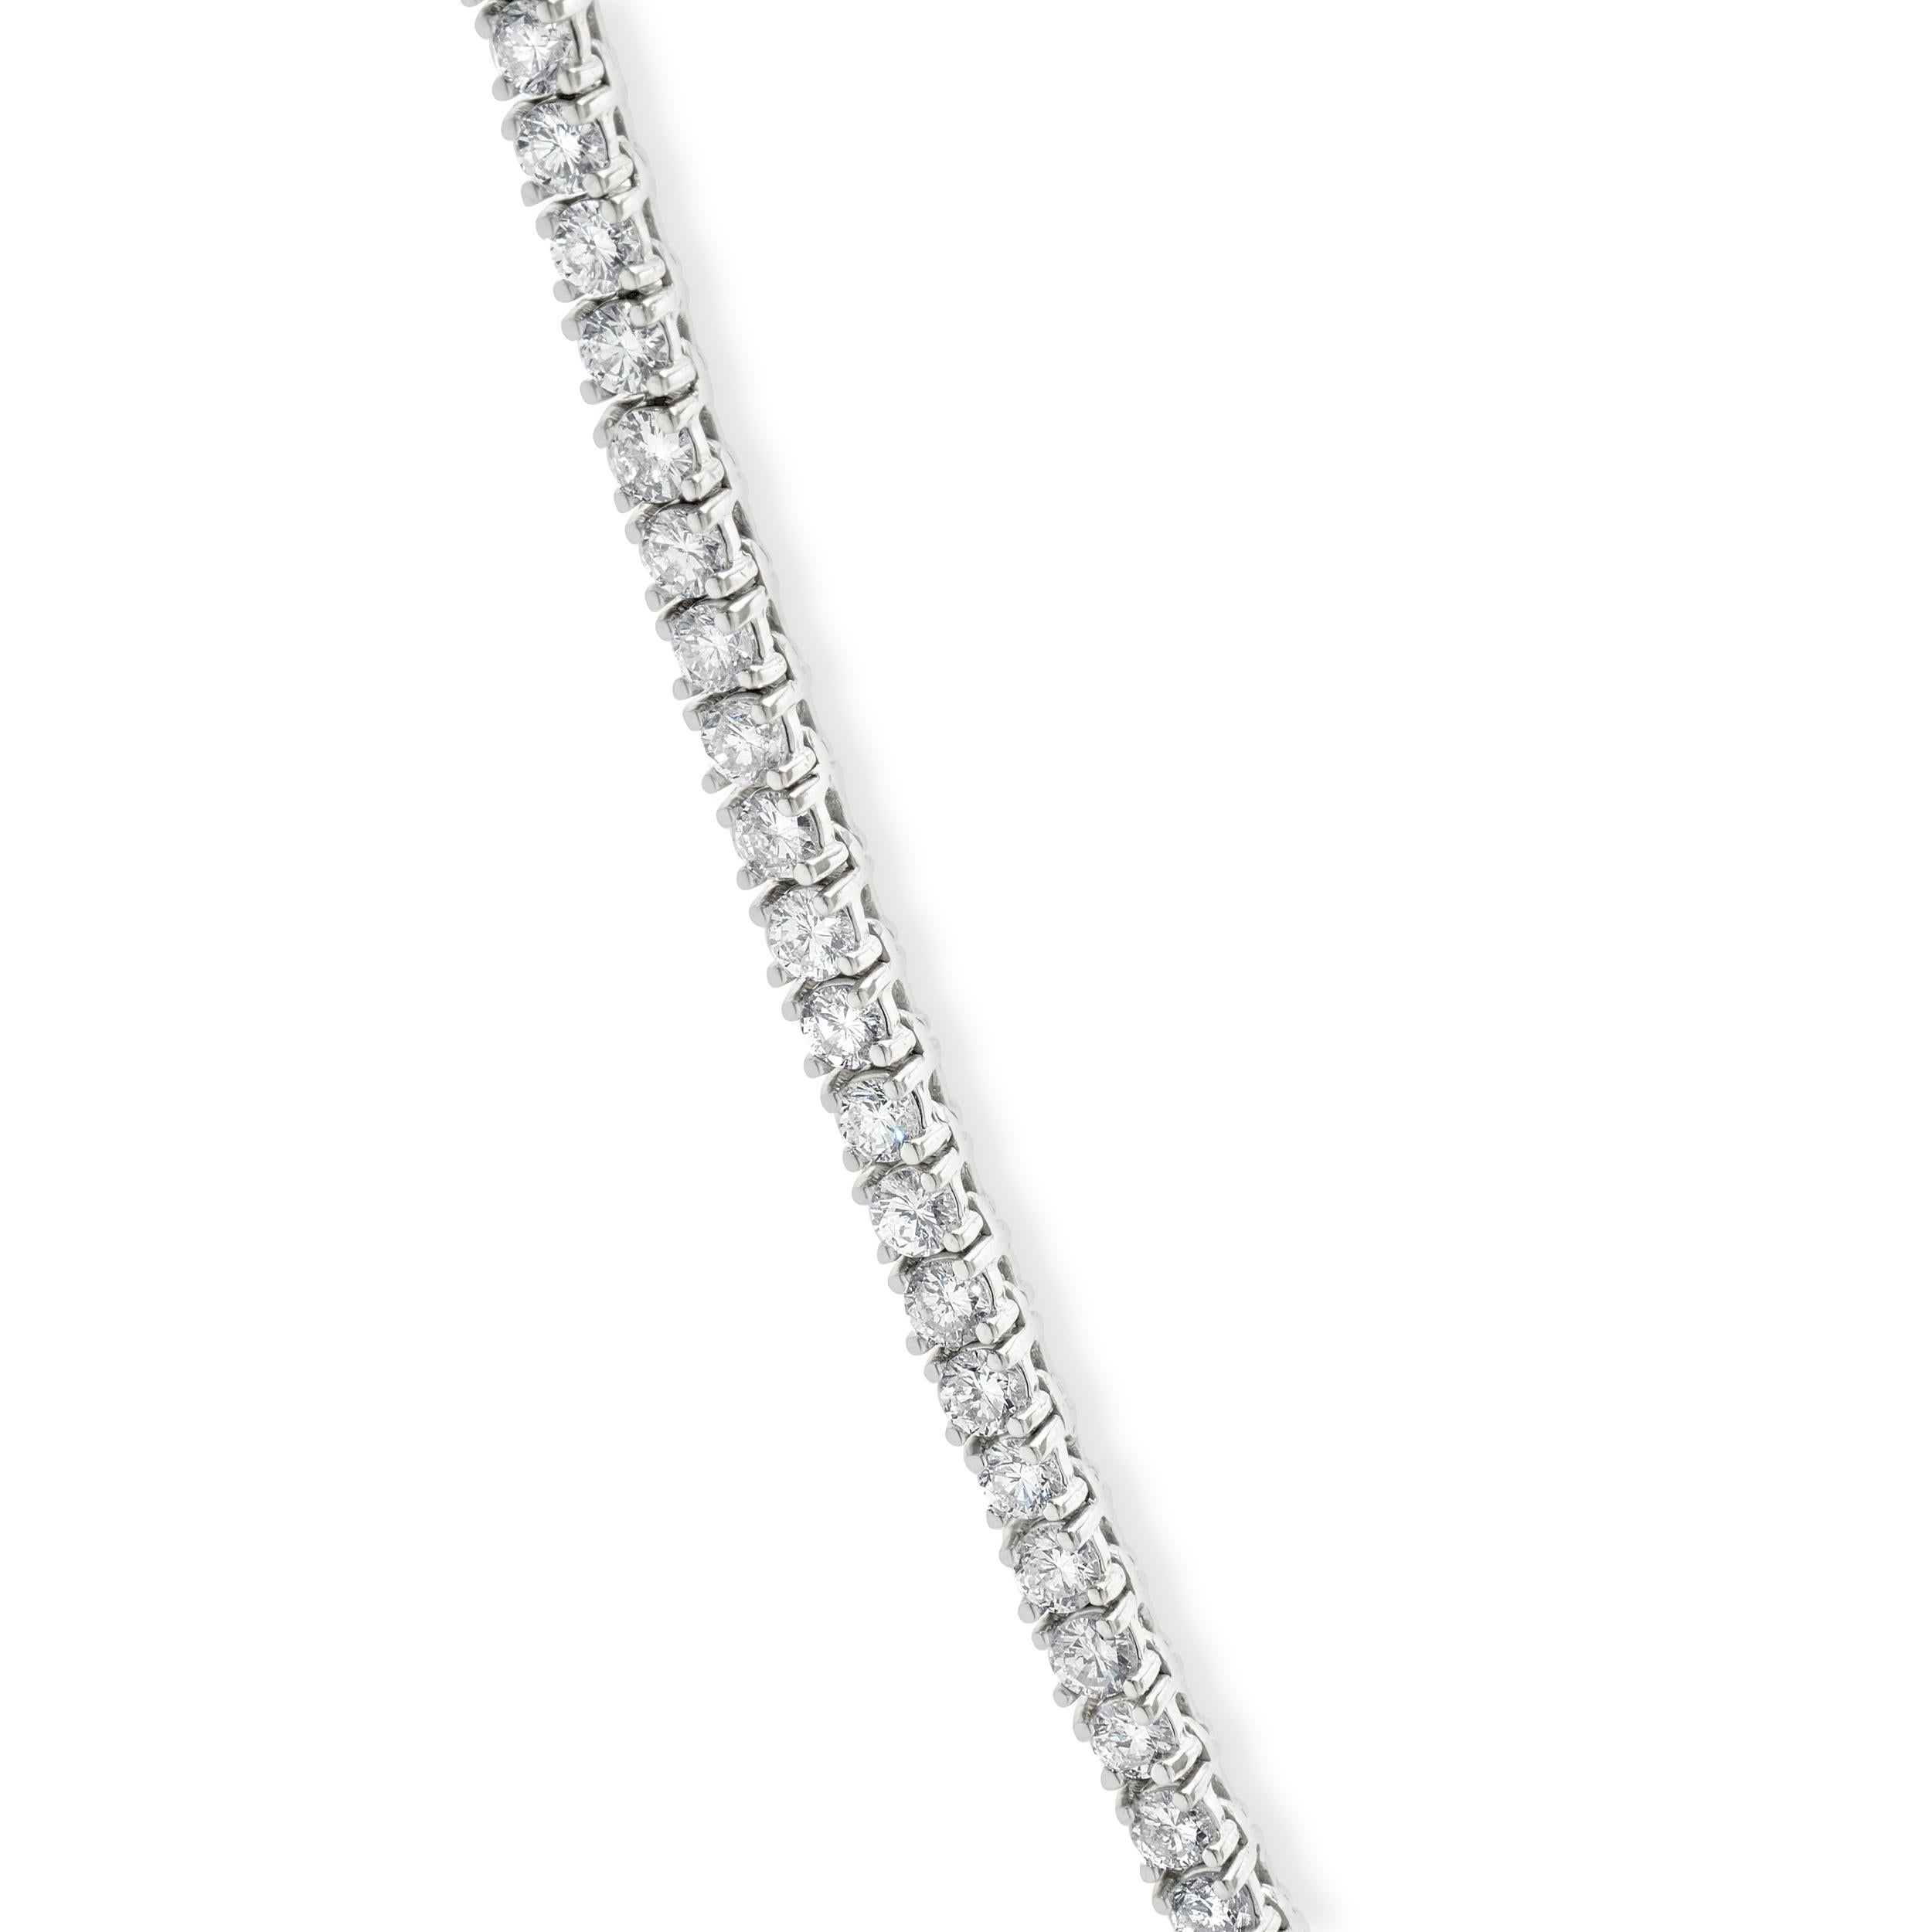 Designer: custom
Material: 14K white gold
Diamonds: 225 round brilliant cut = 20.86cttw
Color: G-H
Clarity: I1
Weight: 49.67 grams
Dimensions: necklace measures 28-inches long